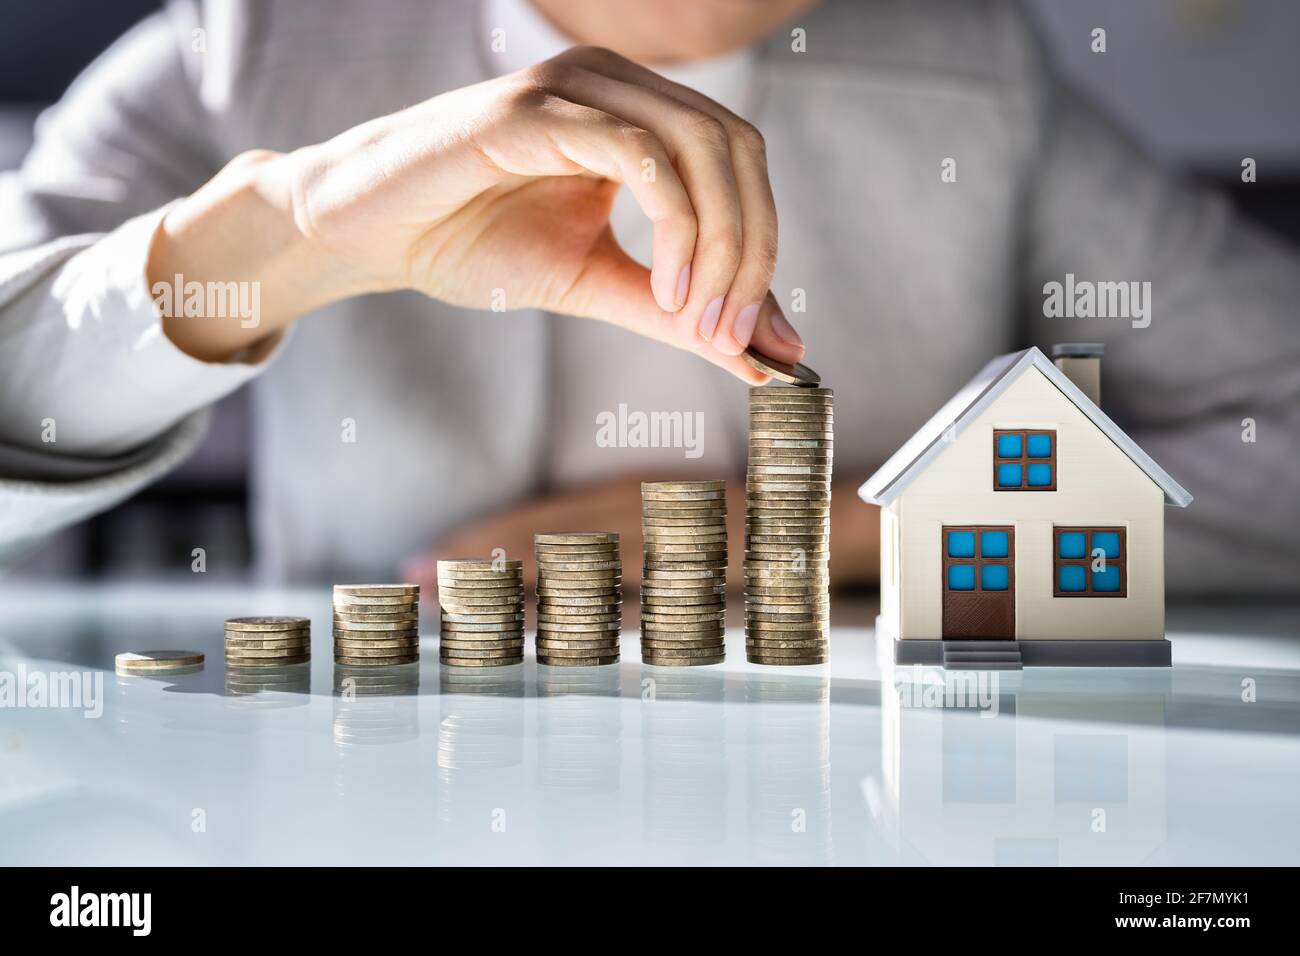 Real Estate Market Property Investment And Tax Stock Photo